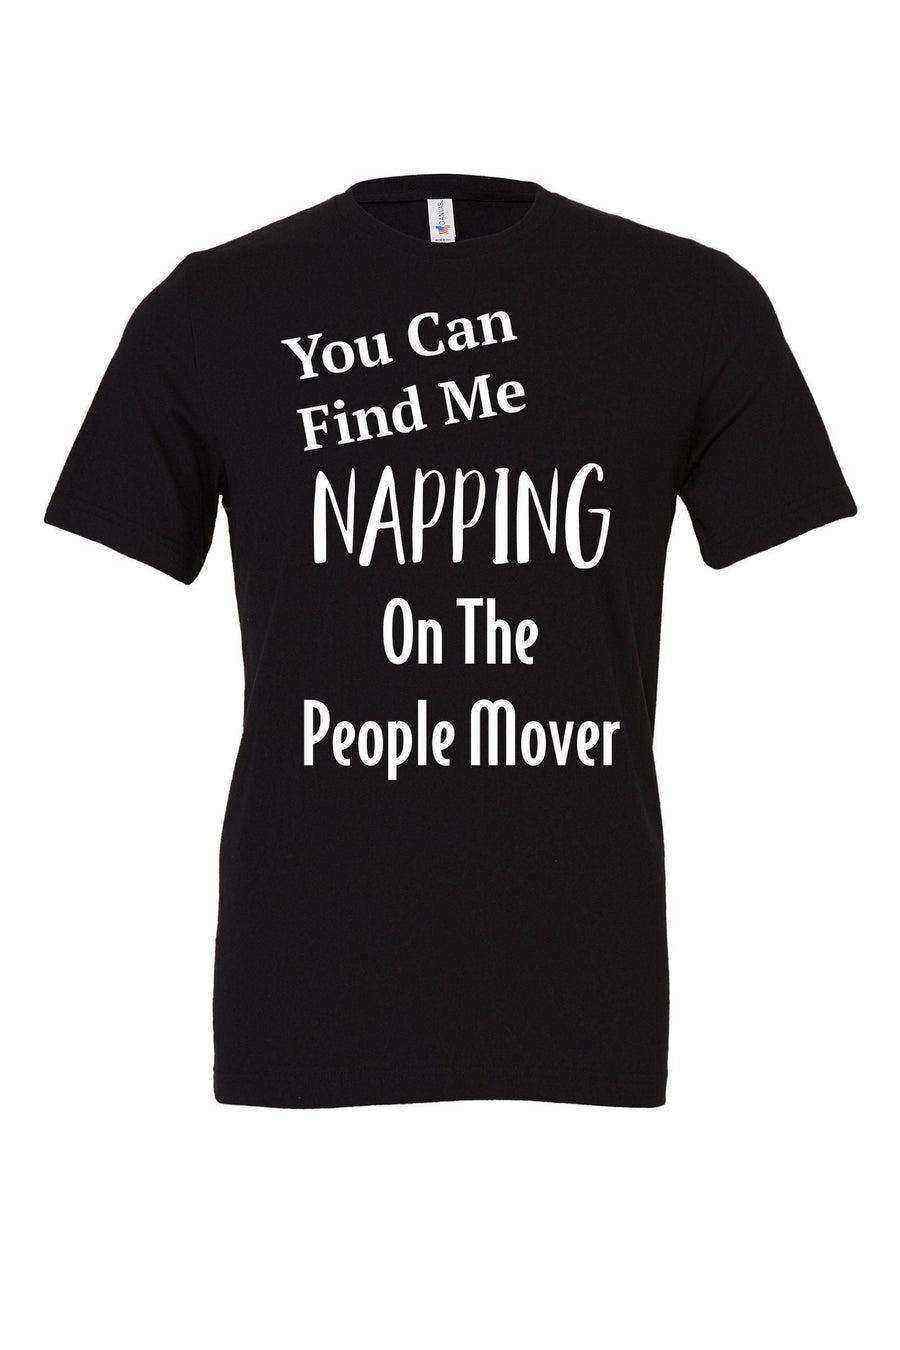 You Can Find Me Napping On The People Mover Crew Neck Tee - Dylan's Tees